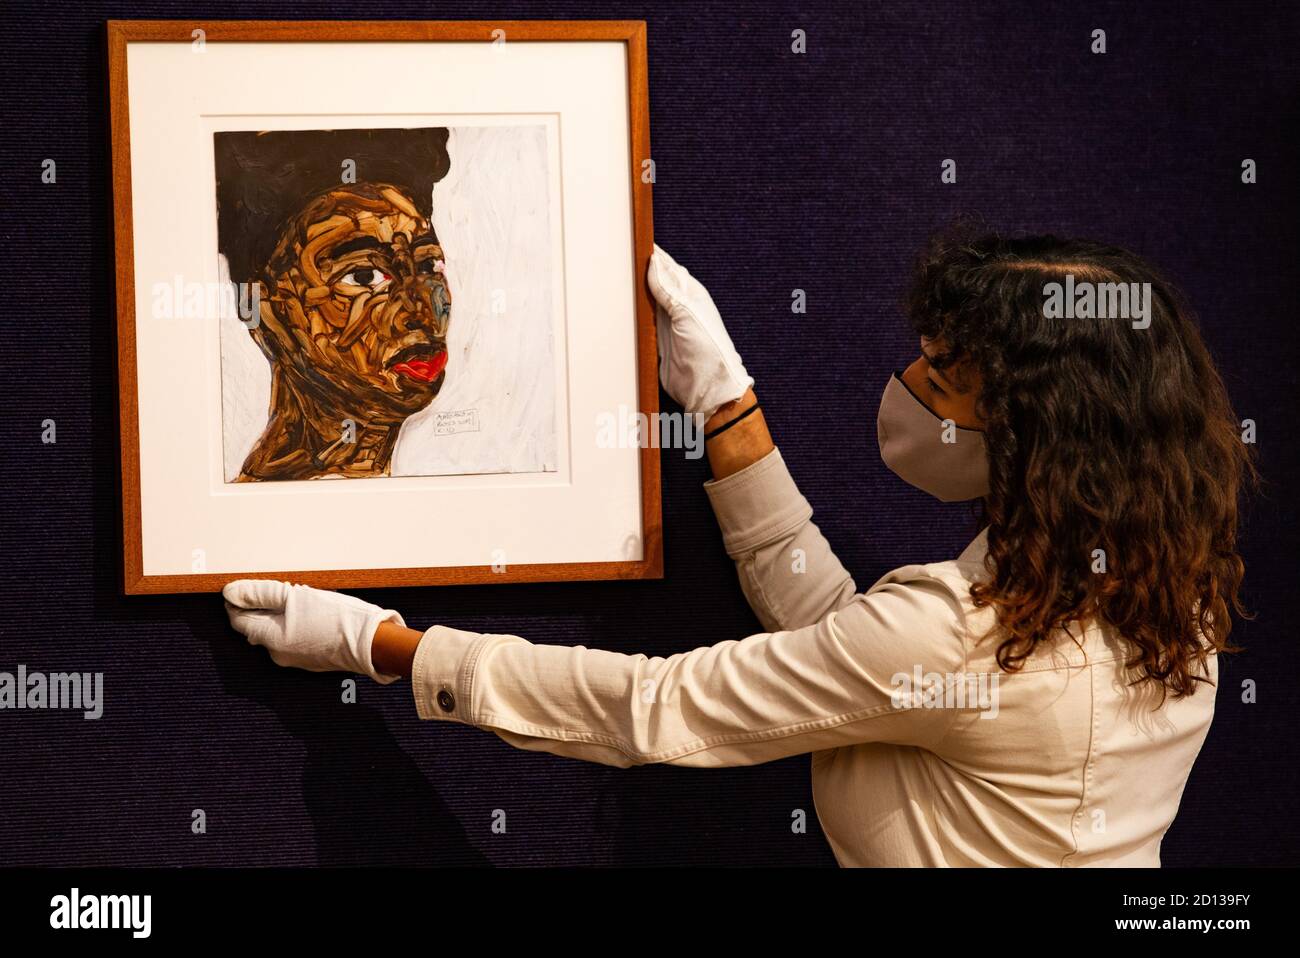 London, UK. 5th Oct, 2020. 'Portrait' by Amoako Boafo, Estimate £15,000- 20,000 Press Preview of Modern and Contemporary African Art sale at Bonhams Auction House. The auction is on on October 8th. Credit: Mark Thomas/Alamy Live News Stock Photo